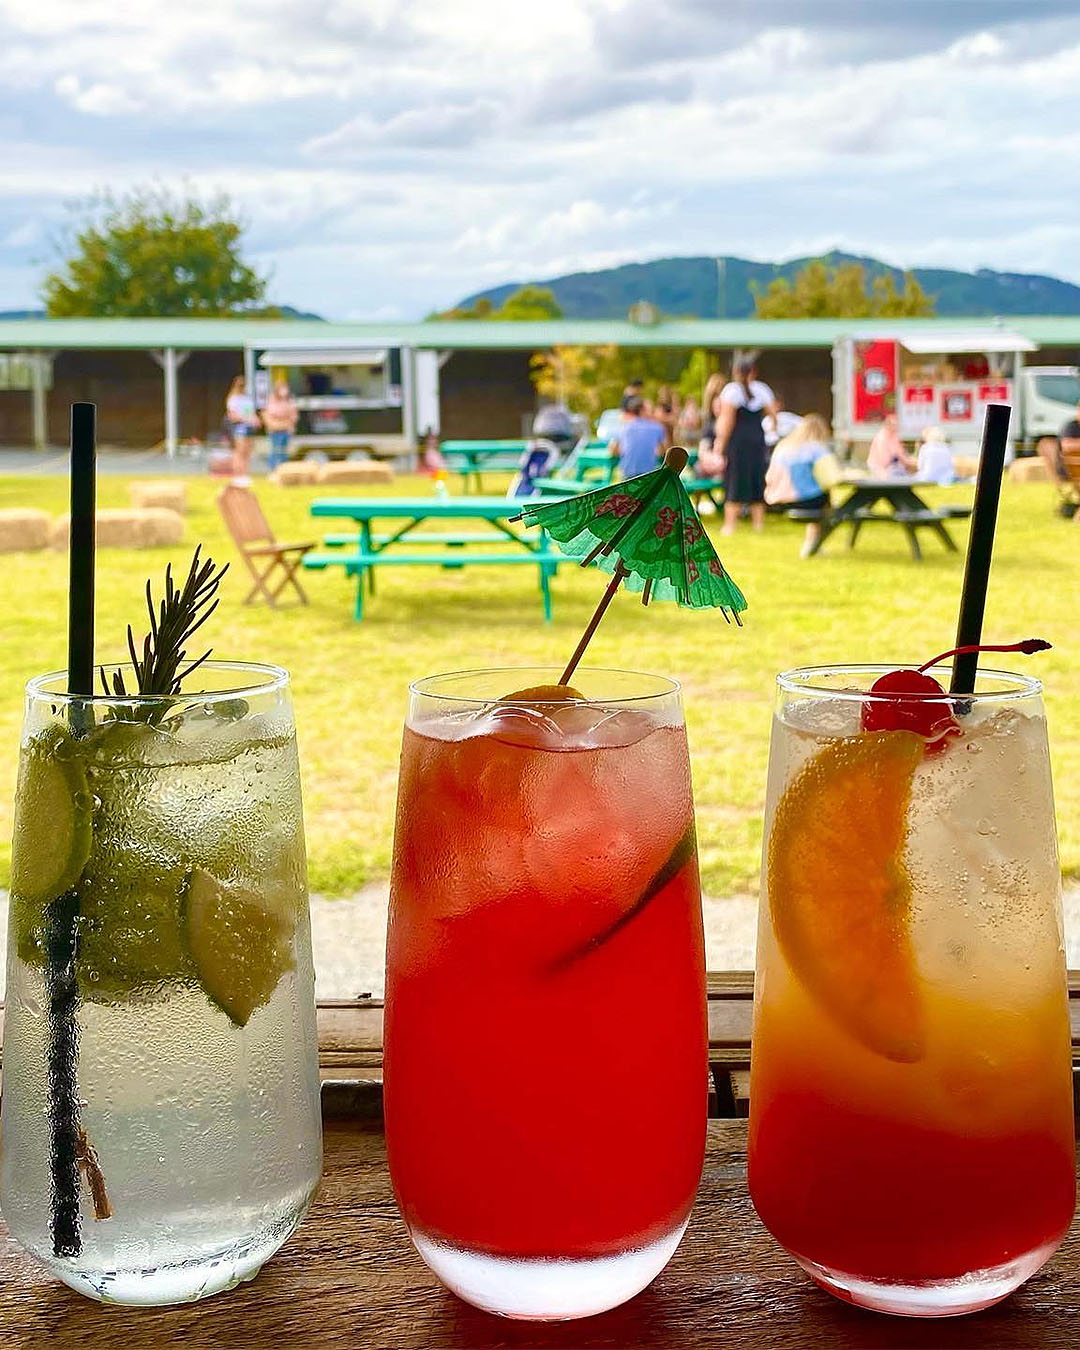 Delicious drinks at Clevedon Village Market, one of the best places in Auckland for the soul.